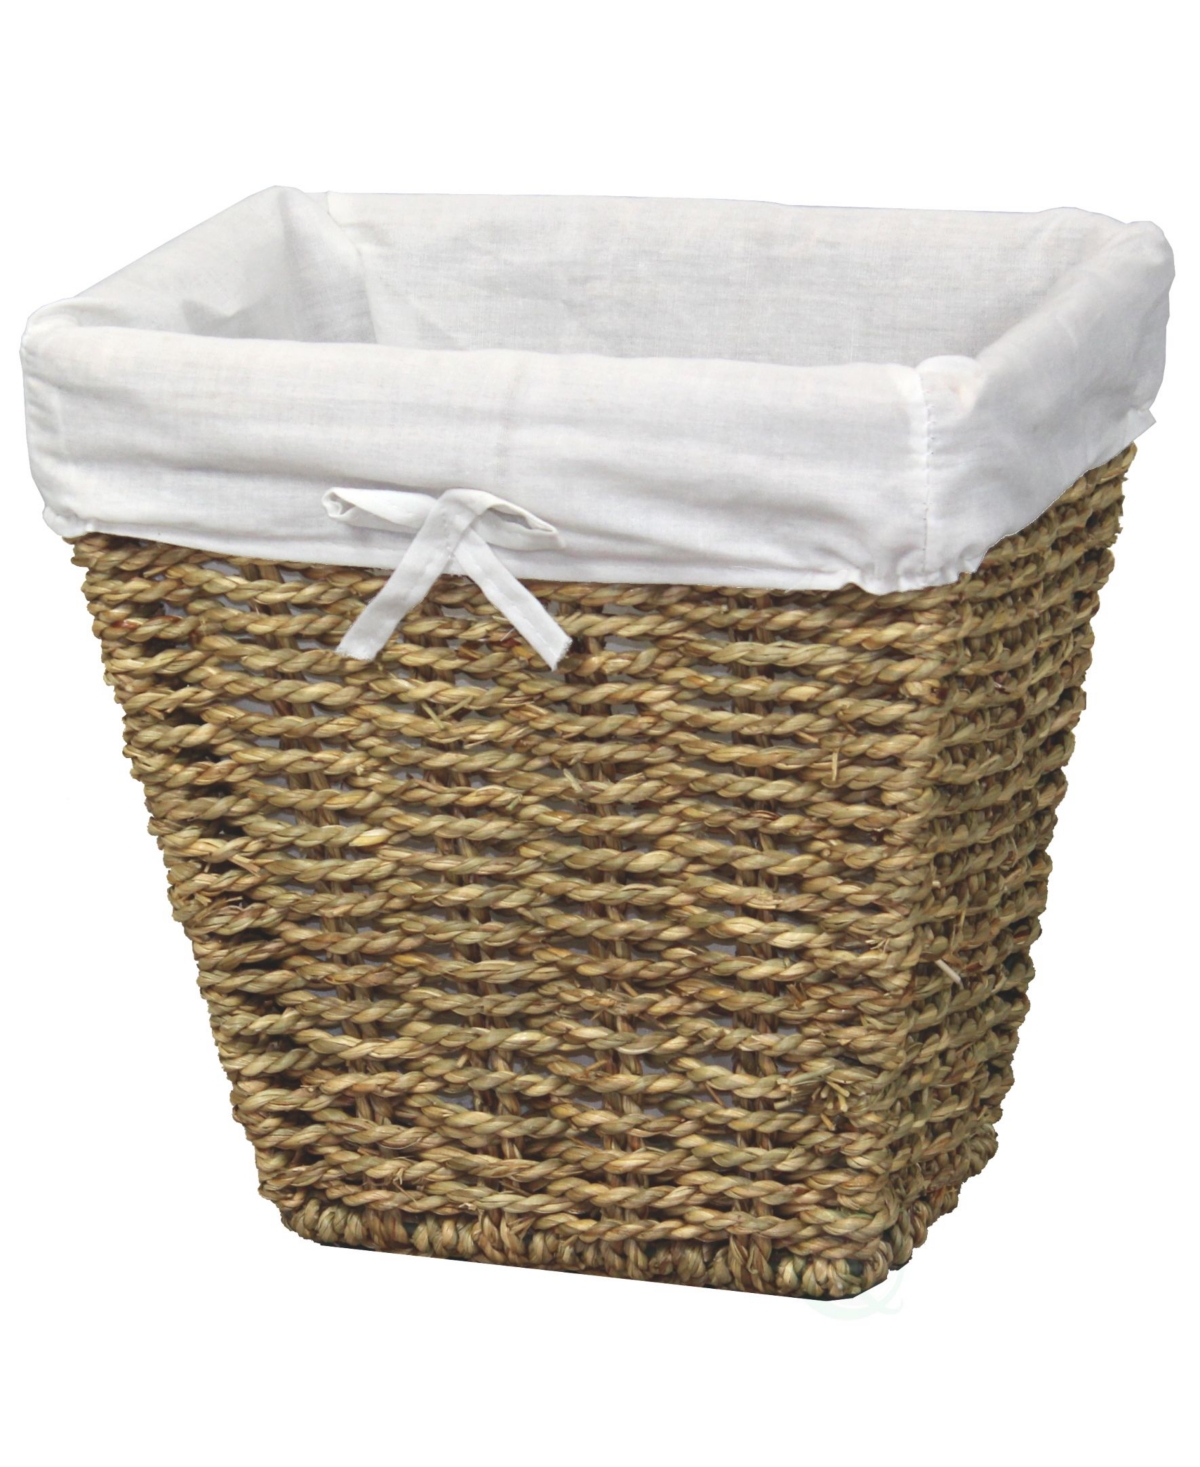 Woven Seagrass Small Waste Bin Lined with Washable Lining - Light Brown